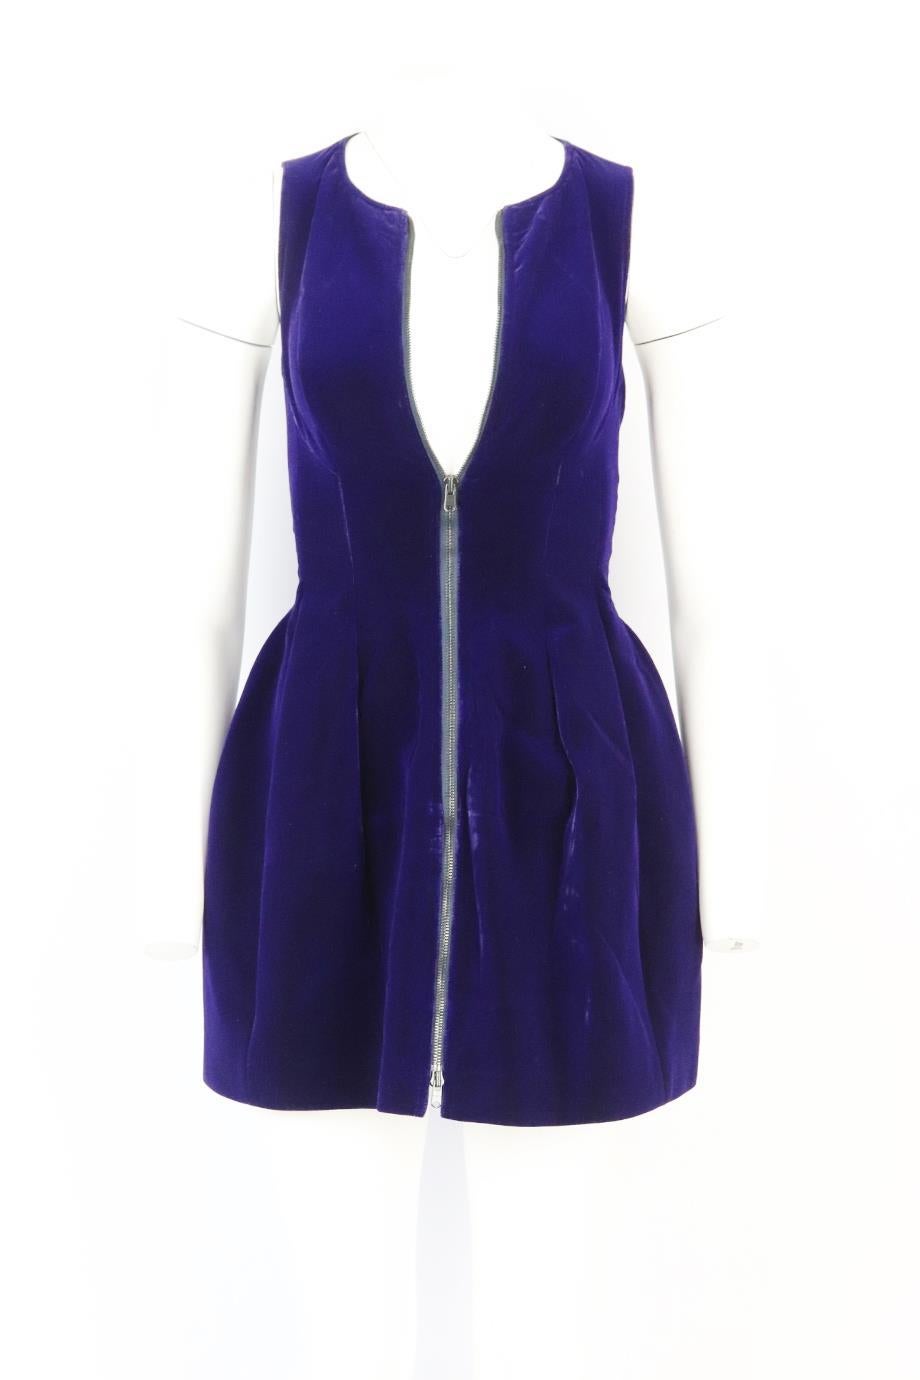 Azzedine Alaïa velvet mini dress. Blue. Sleeveless, crewneck. Zip fastening at front. 65% Rayon, 35% cupro; lining: 100% cupro. Size: FR 38 (UK 10, US 6, IT 42). Bust: 30 in. Waist: 25 in. Hips: 46 in. Length: 30.5 in. Very good condition - No sign